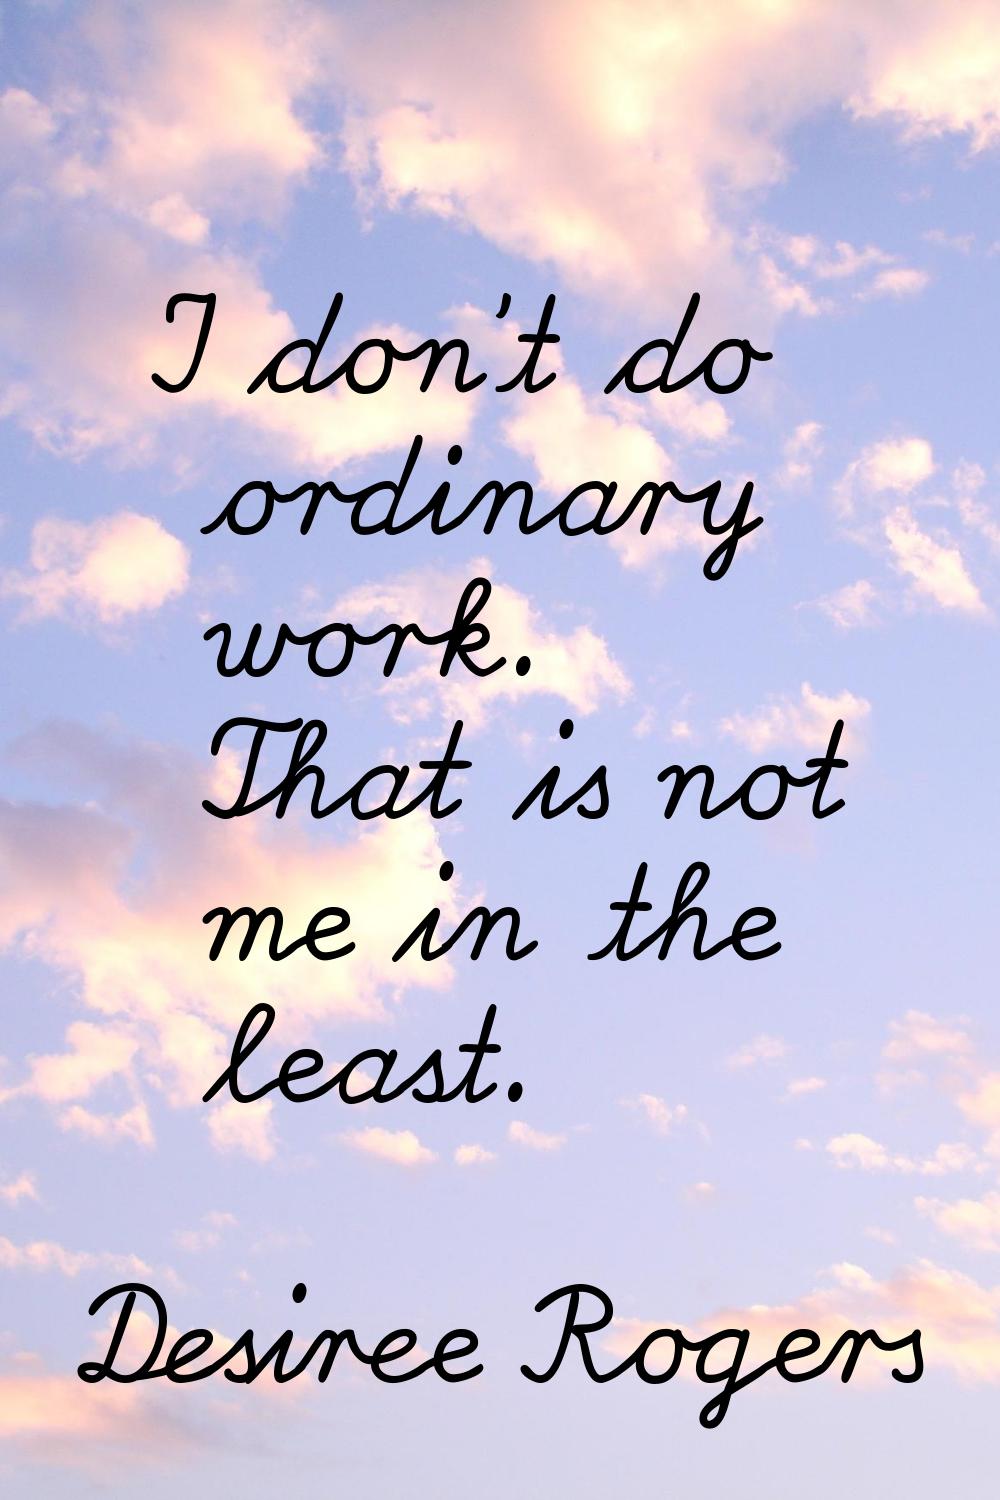 I don't do ordinary work. That is not me in the least.